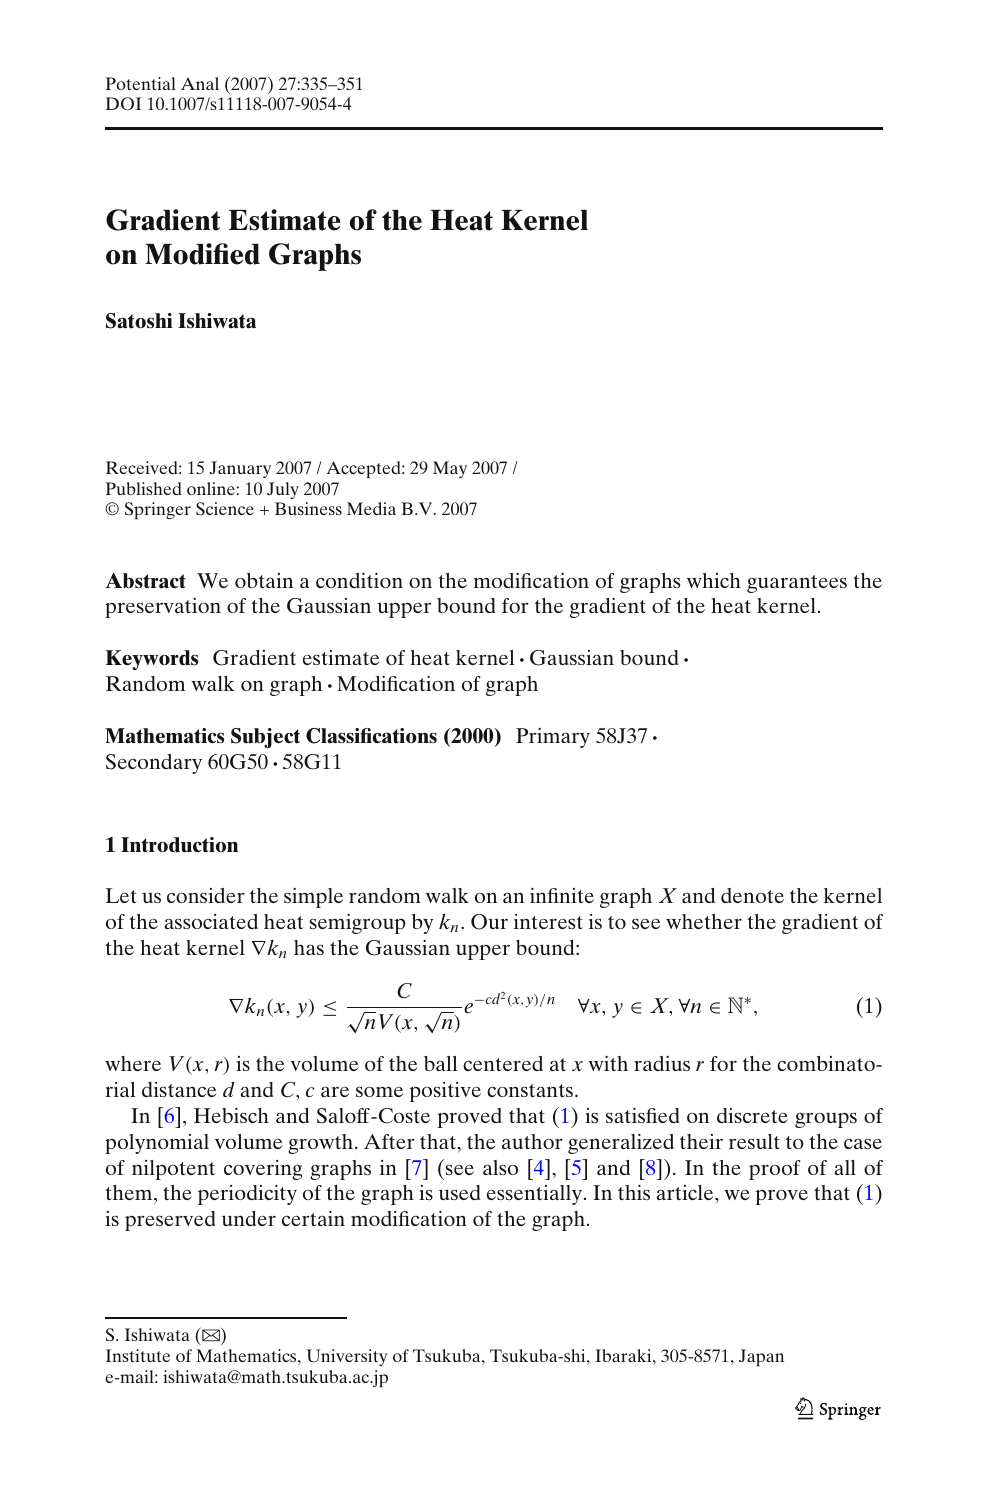 Gradient Estimate Of The Heat Kernel On Modified Graphs Topic Of Research Paper In Mathematics Download Scholarly Article Pdf And Read For Free On Cyberleninka Open Science Hub